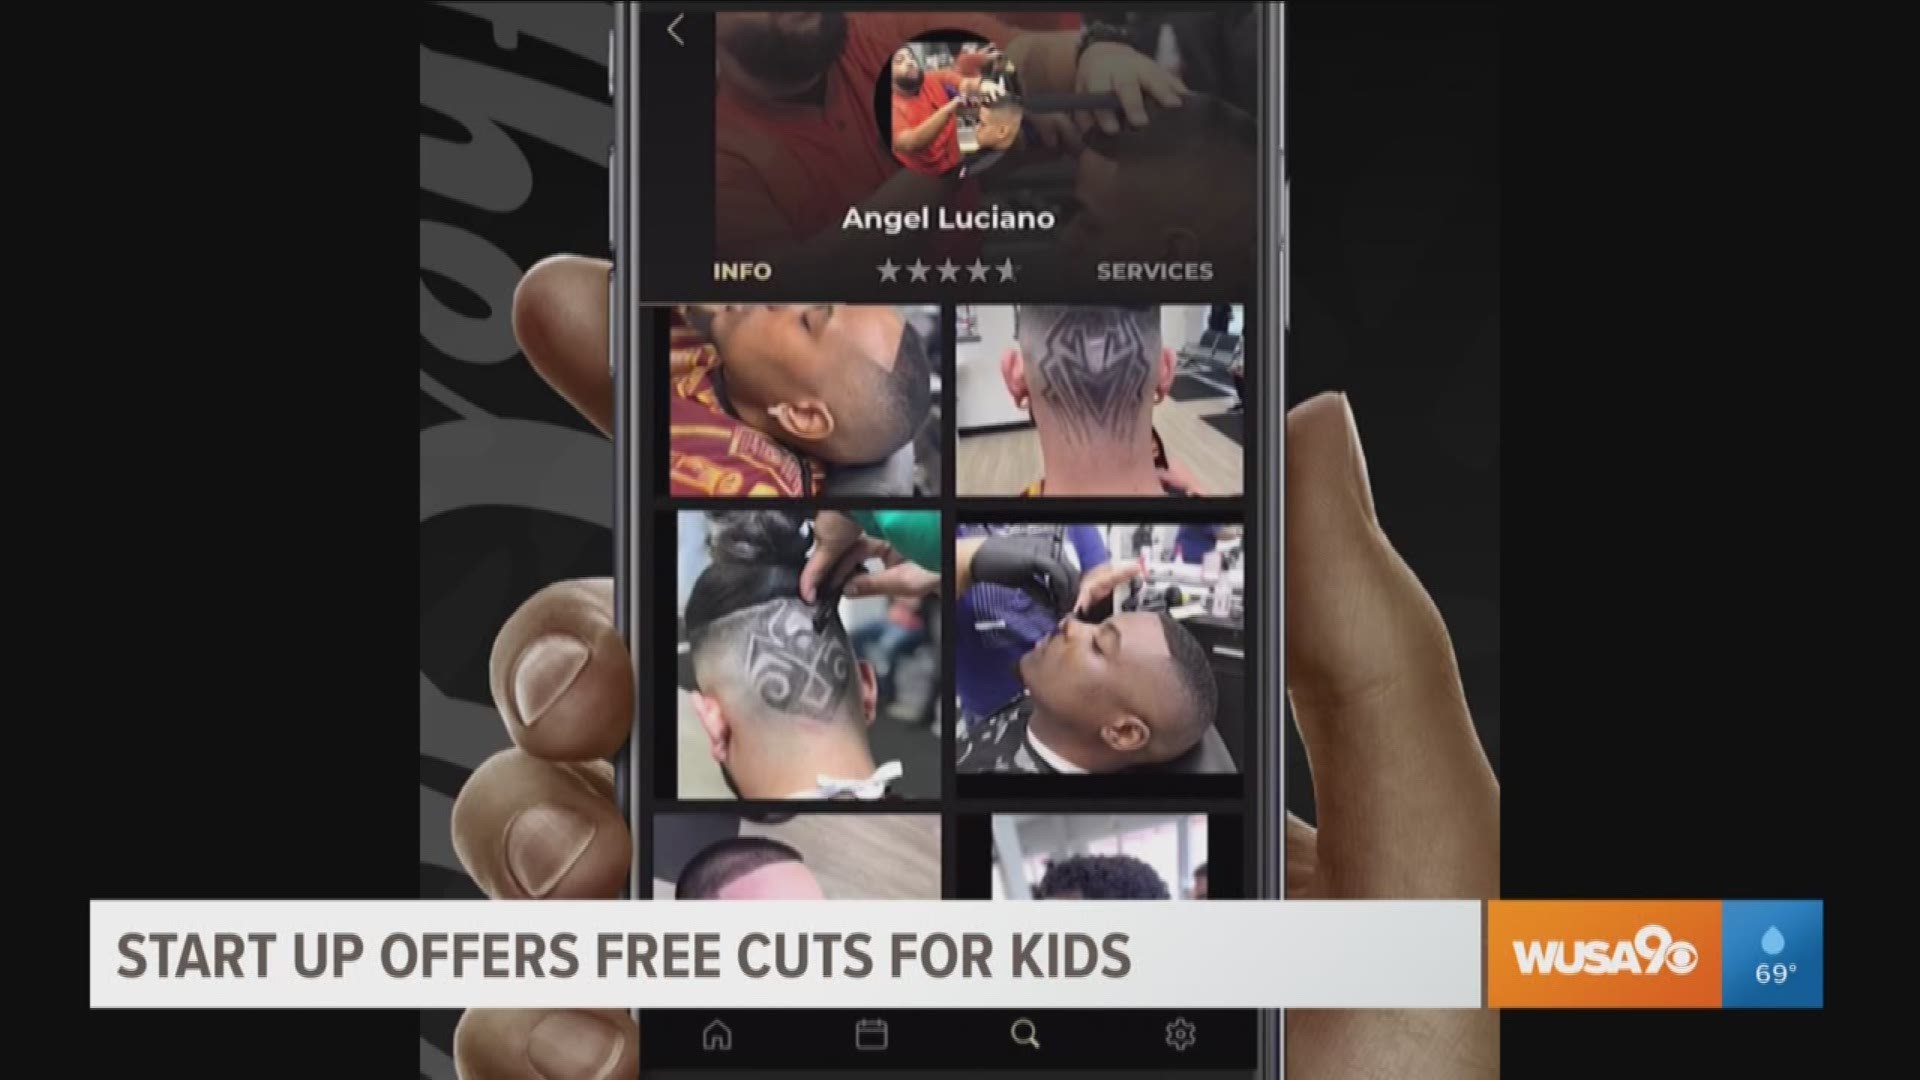 A new and simple app called, "The Cut" can help you and your family find a barber nearby. Markette talks to Obi Omile who is the creator of the app which also has a deal that offers free haircuts for kids in the back-to-school season.